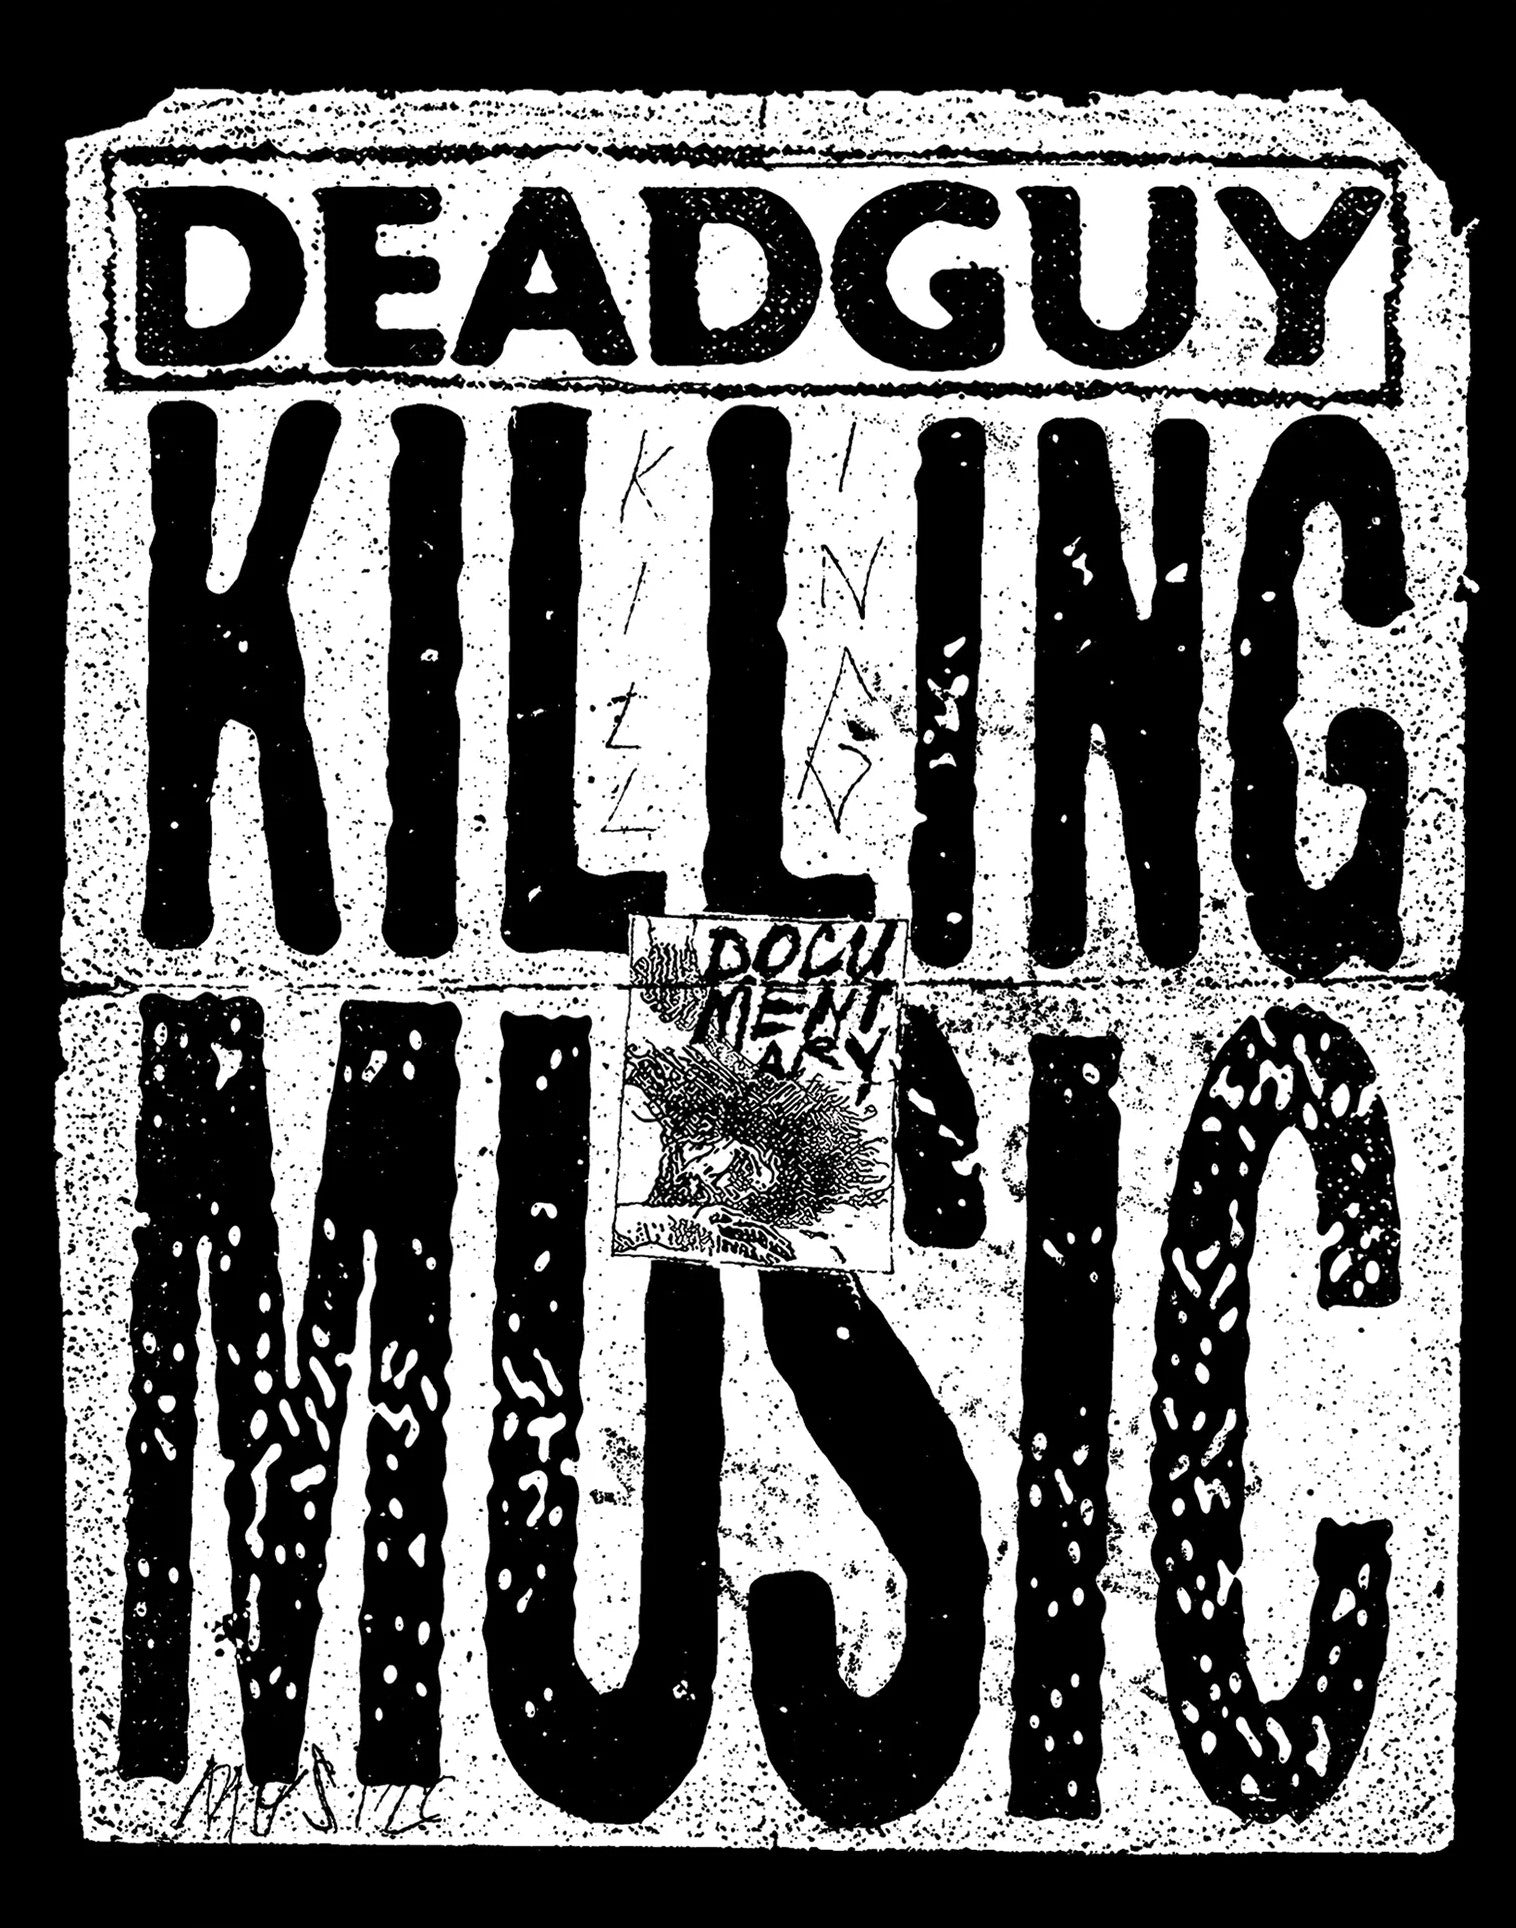 DEADGUY: KILLING MUSIC (LIMITED EDITION) BLU-RAY